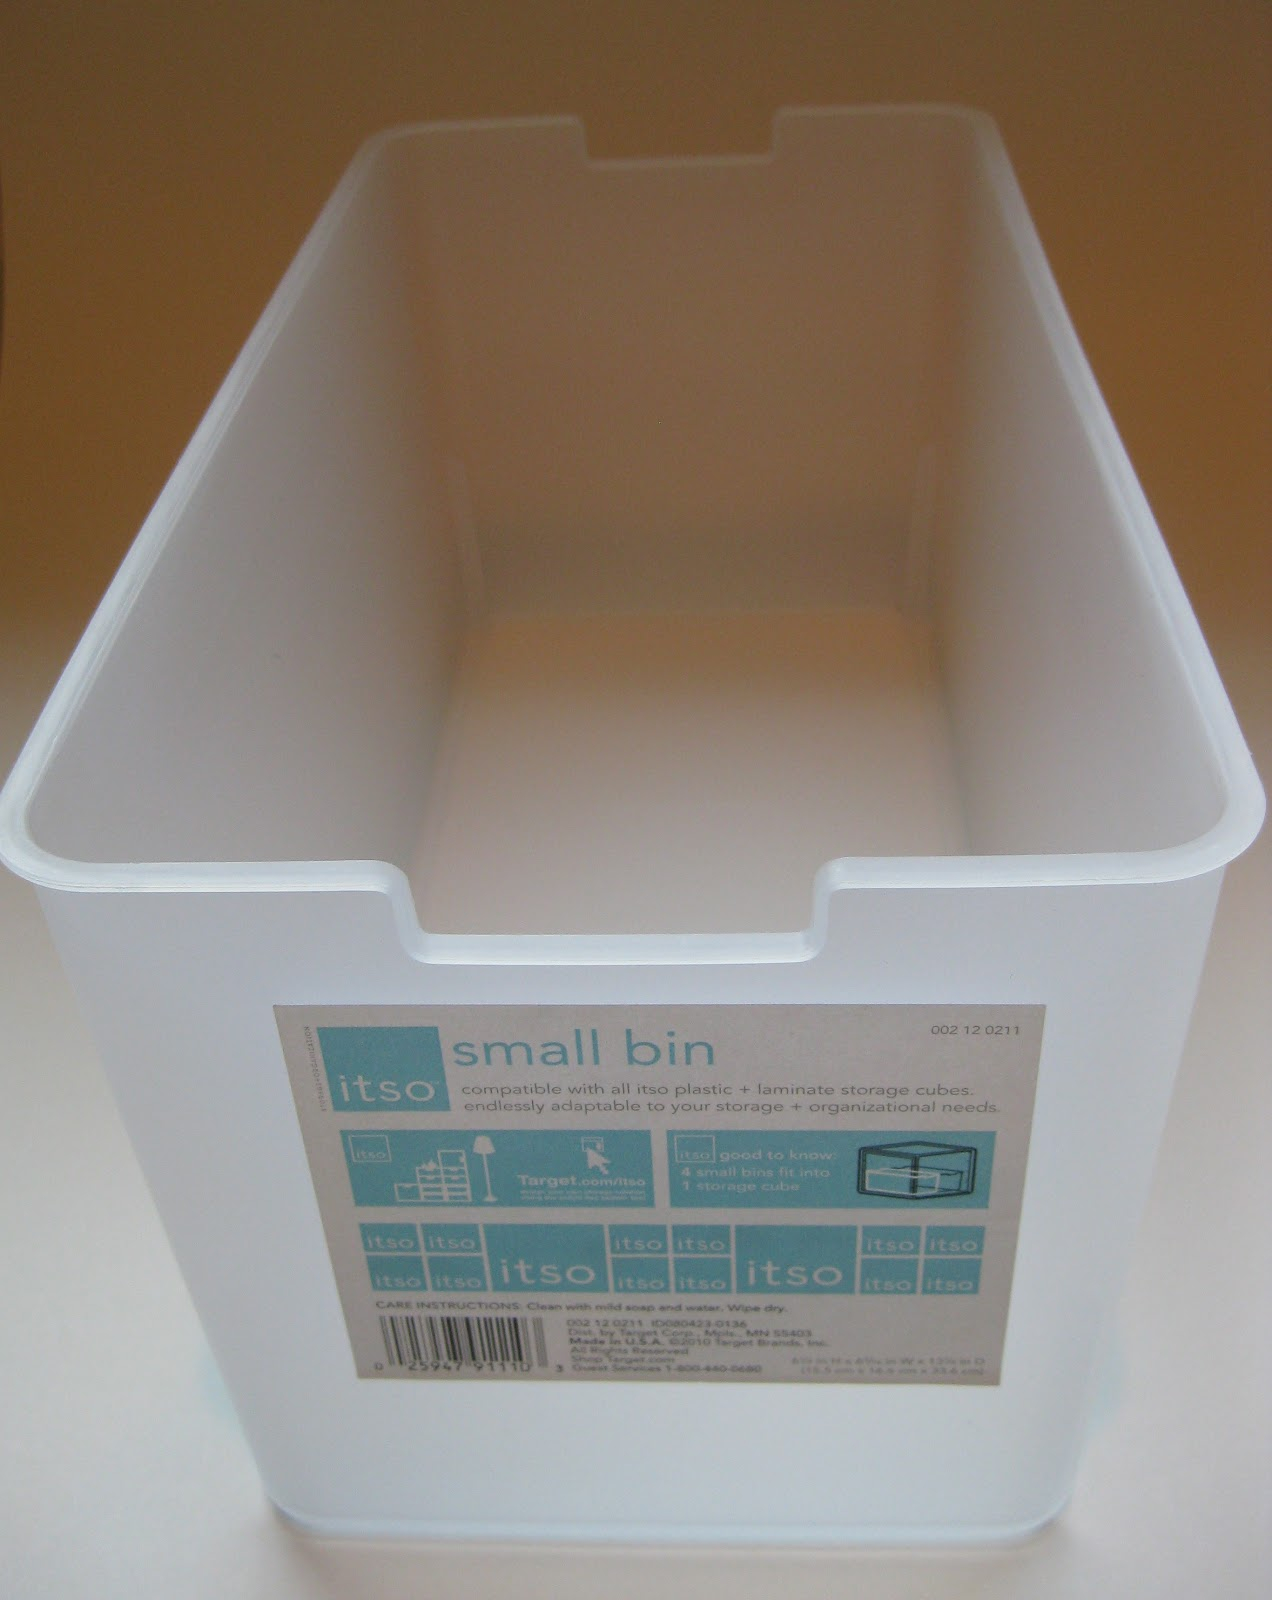 Itso Bins Perfect For Storage Organized 31 intended for size 1272 X 1600